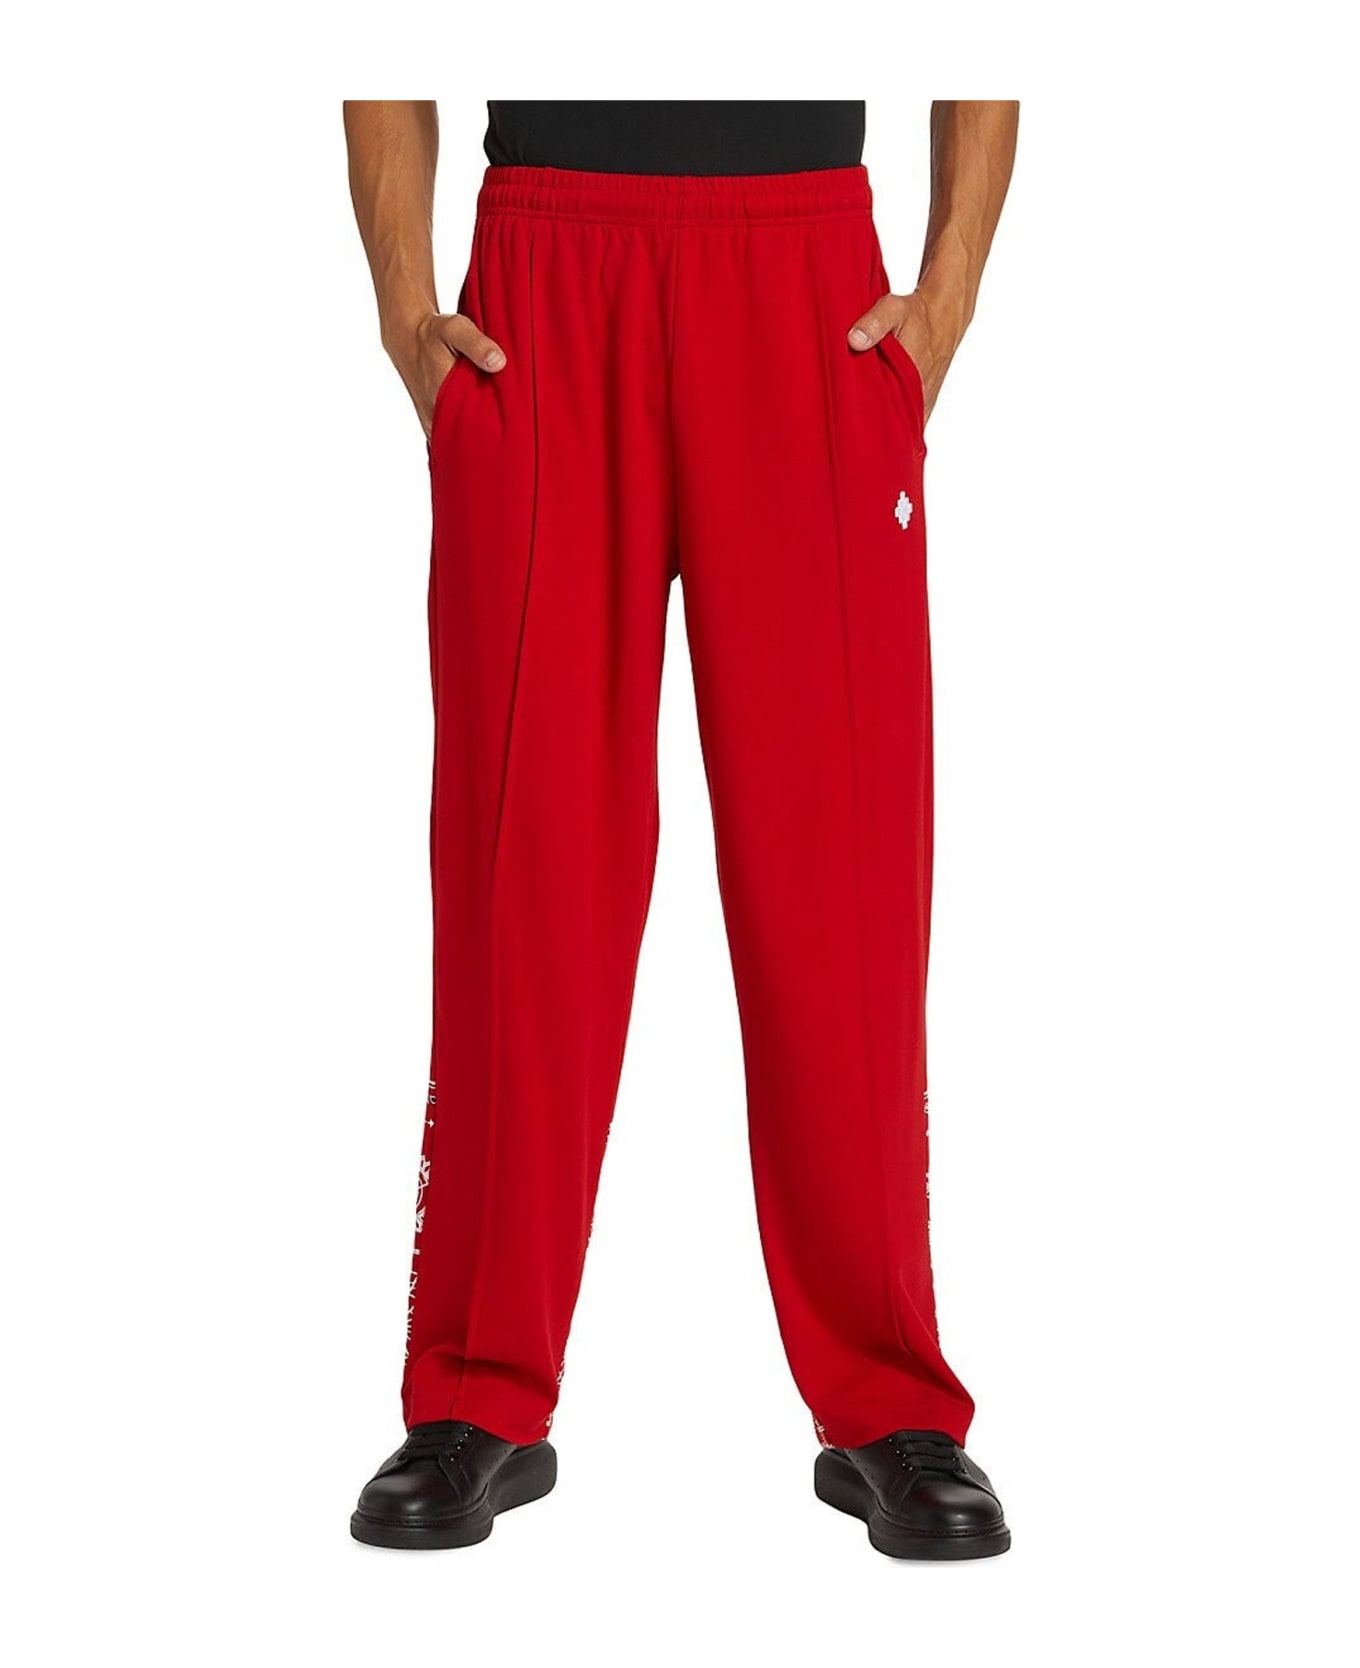 Marcelo Burlon County Of Milan Track Pants - Red ボトムス